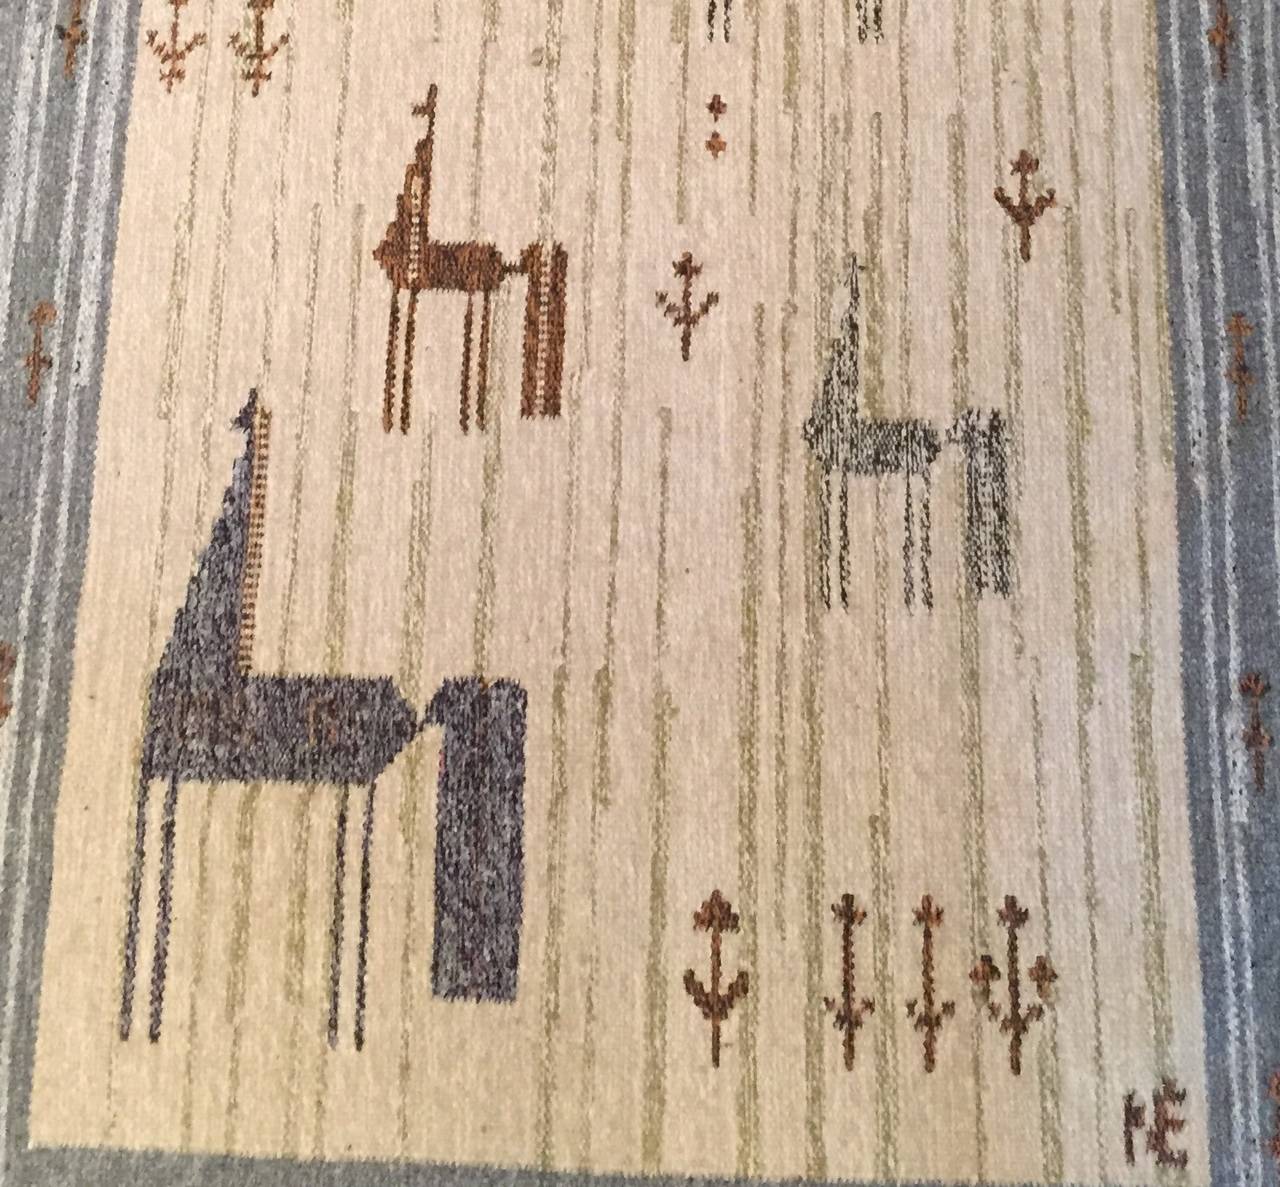 Wool rolakan of five stylized horses and wild-flowers in neutral tones. Attributed to a Finnish designer. Weavers initials on the bottom right corner.